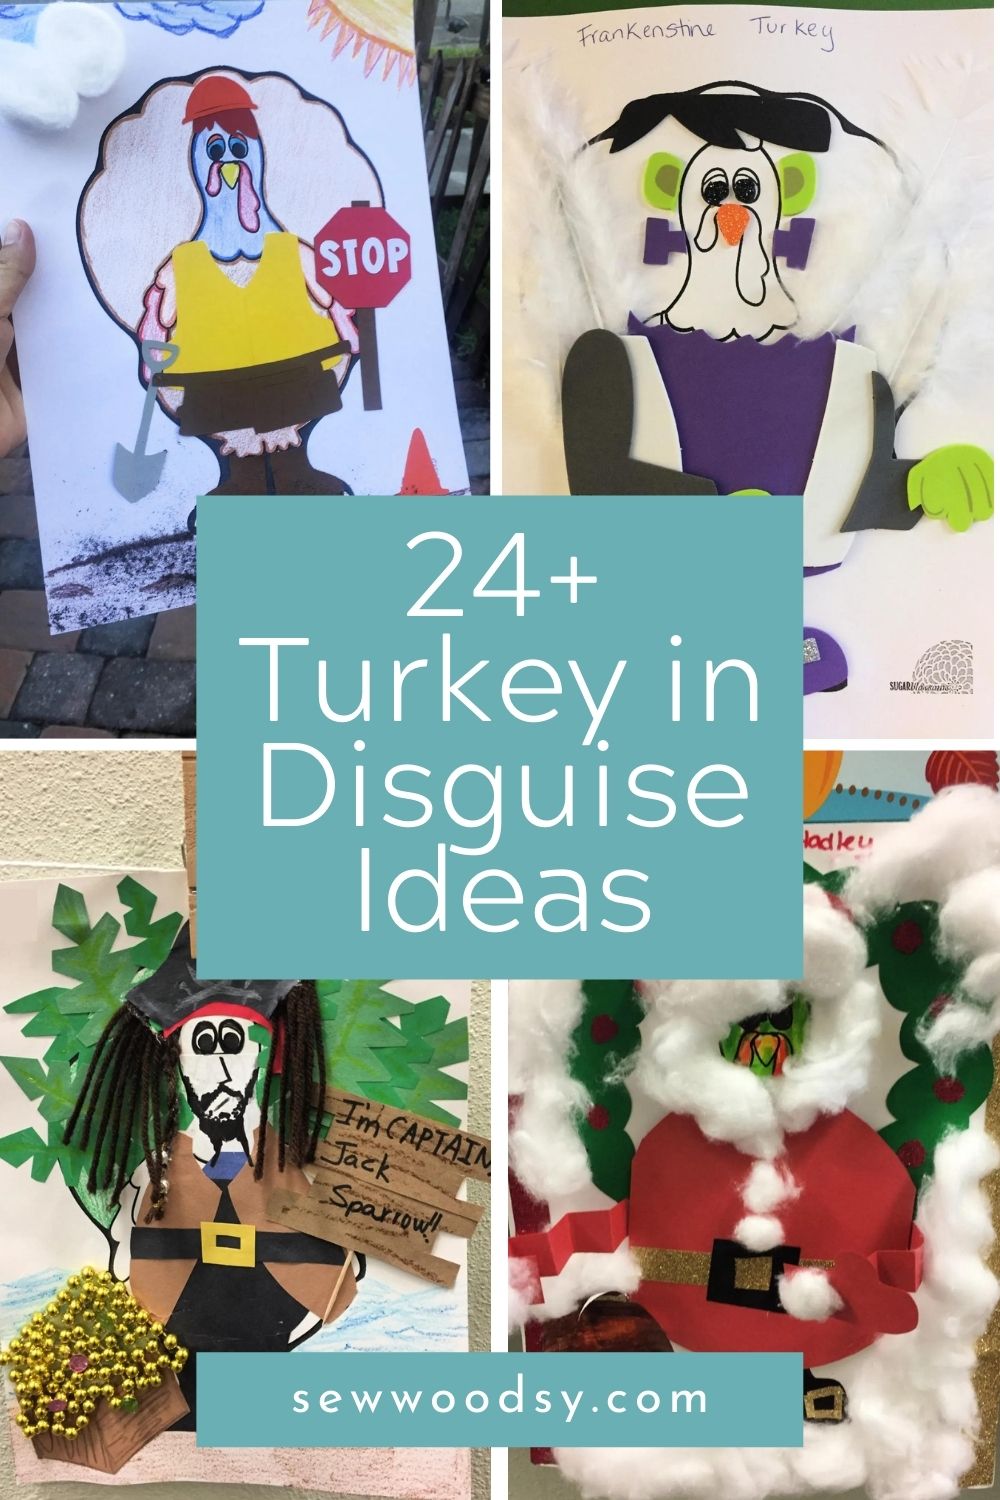 Four photos of four turkey's in disguise craft projects with blog post title text on image for Pinterest.